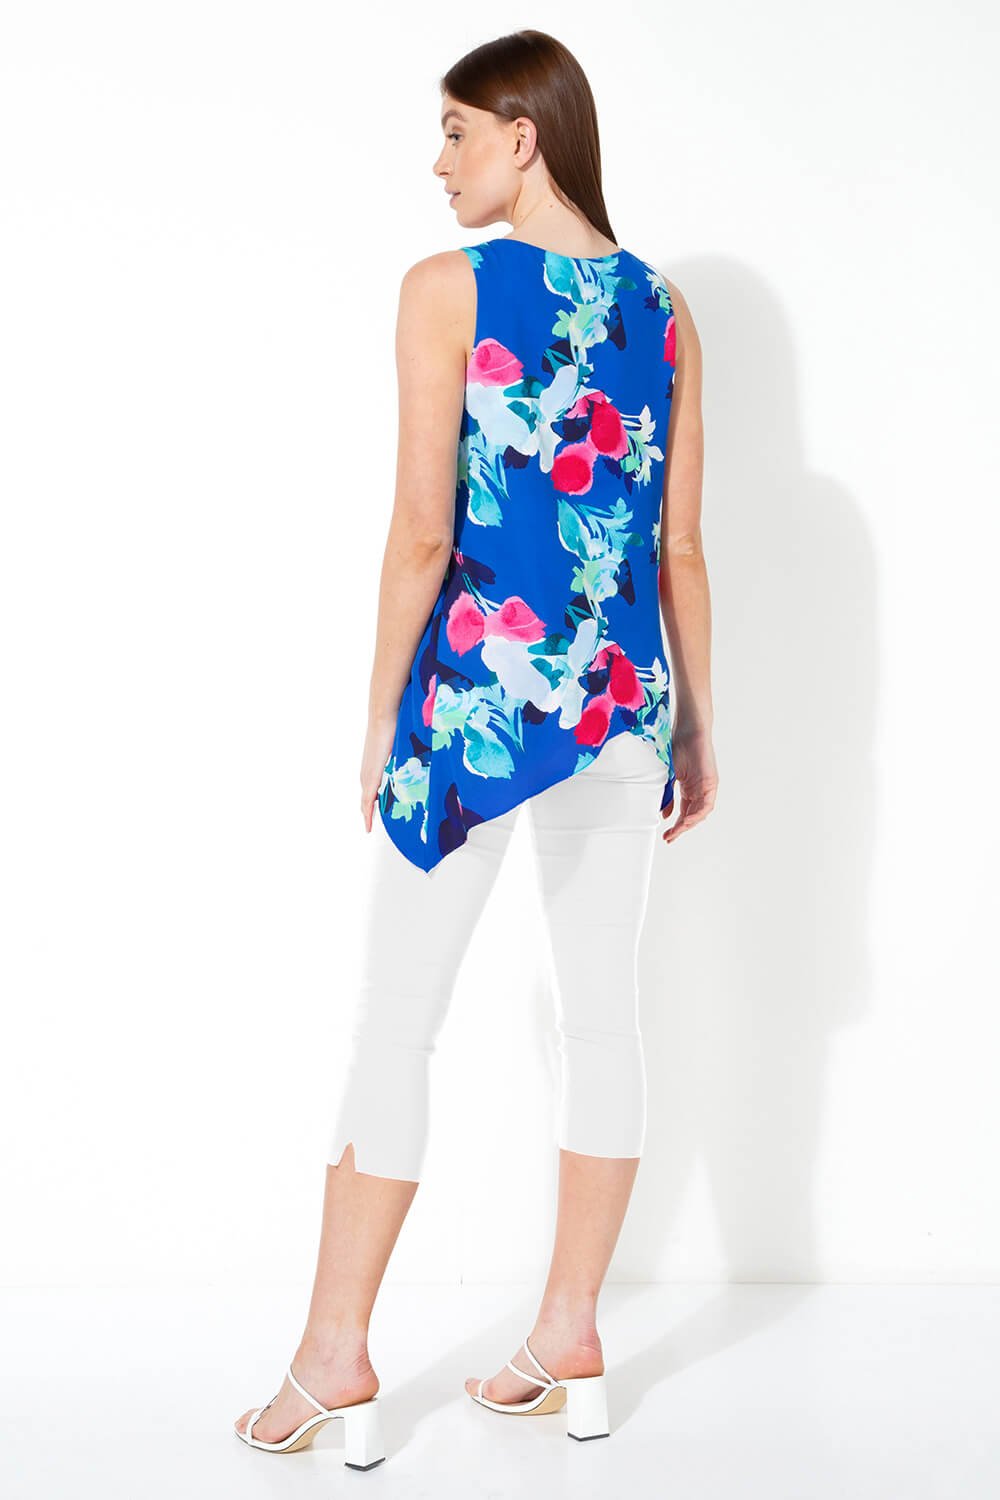 Royal Blue Floral Print Asymmetric Top with Necklace, Image 2 of 5